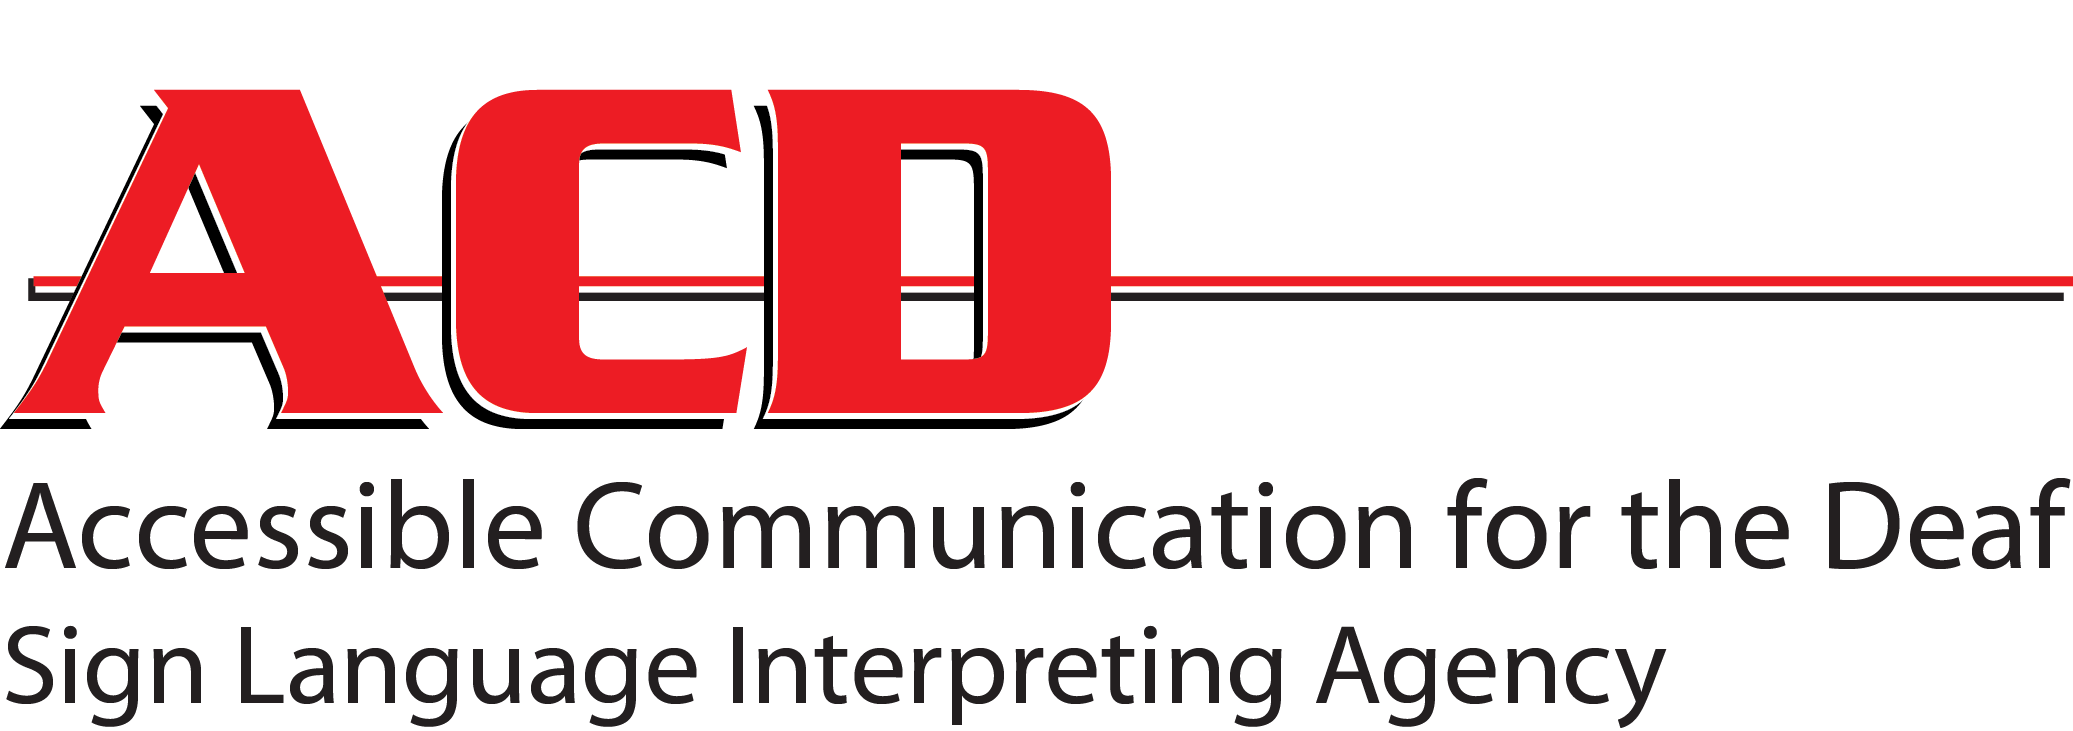 Accessible Communication for the Deaf logo